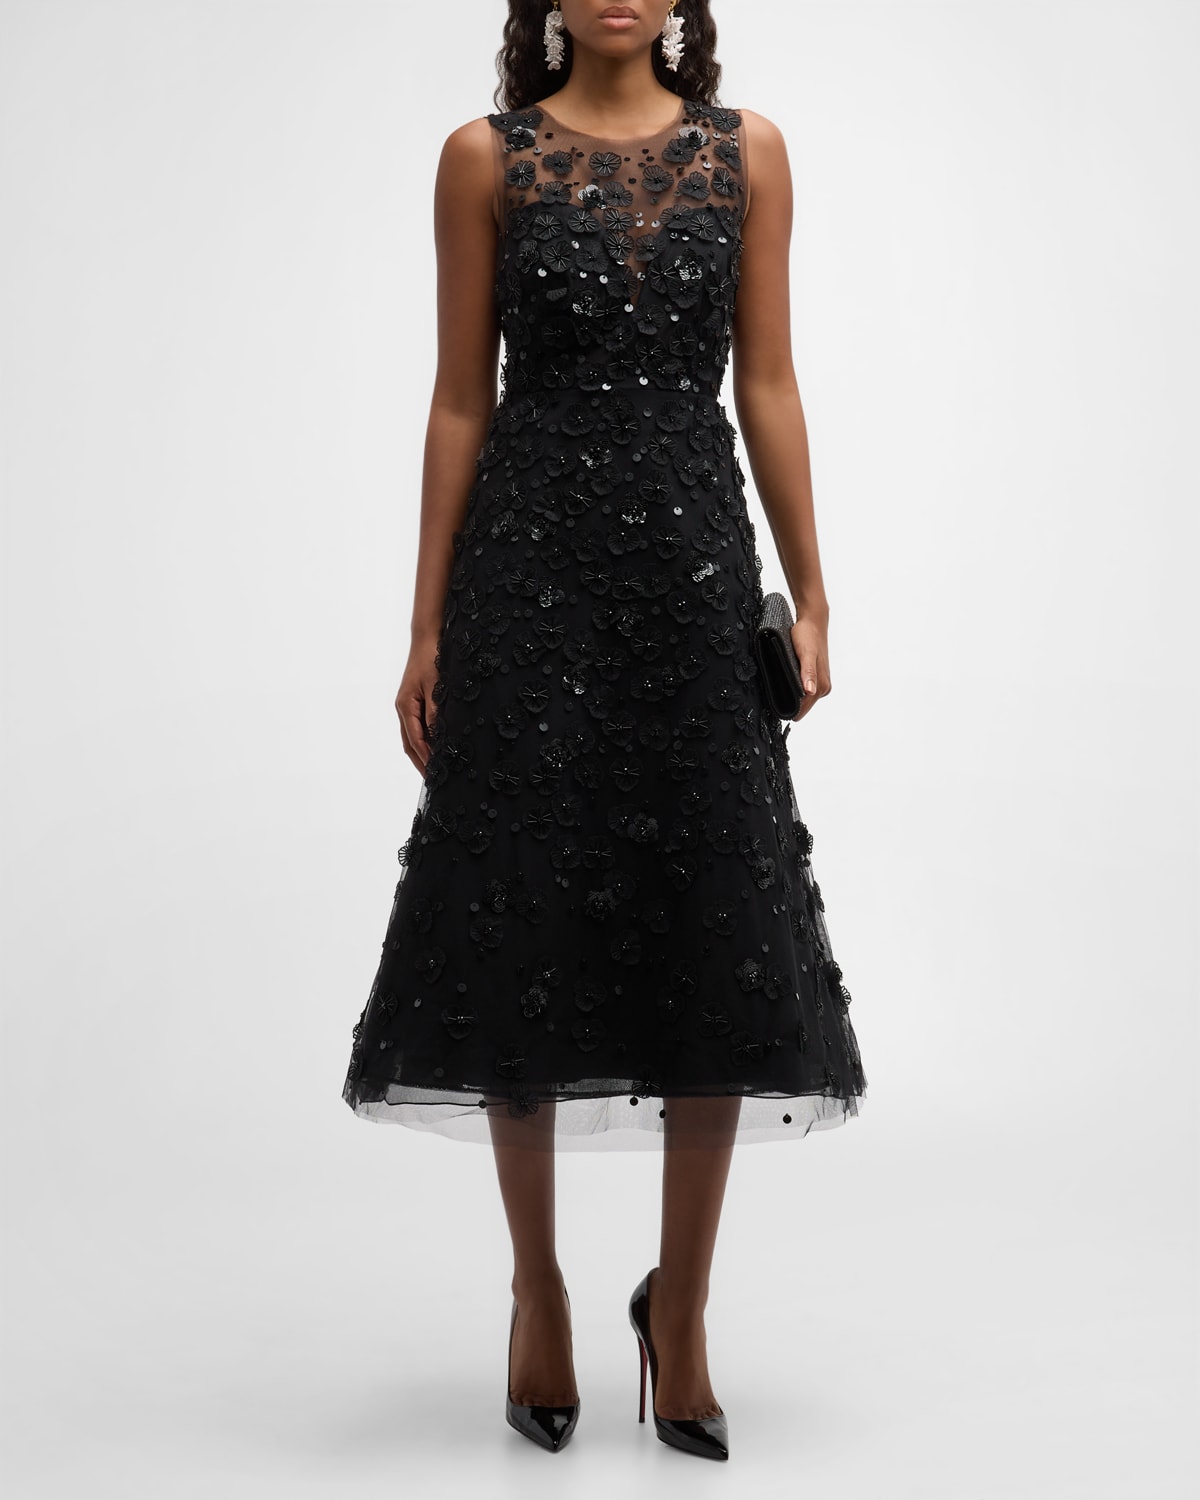 Floral Applique Sequined Beaded Midi Dress